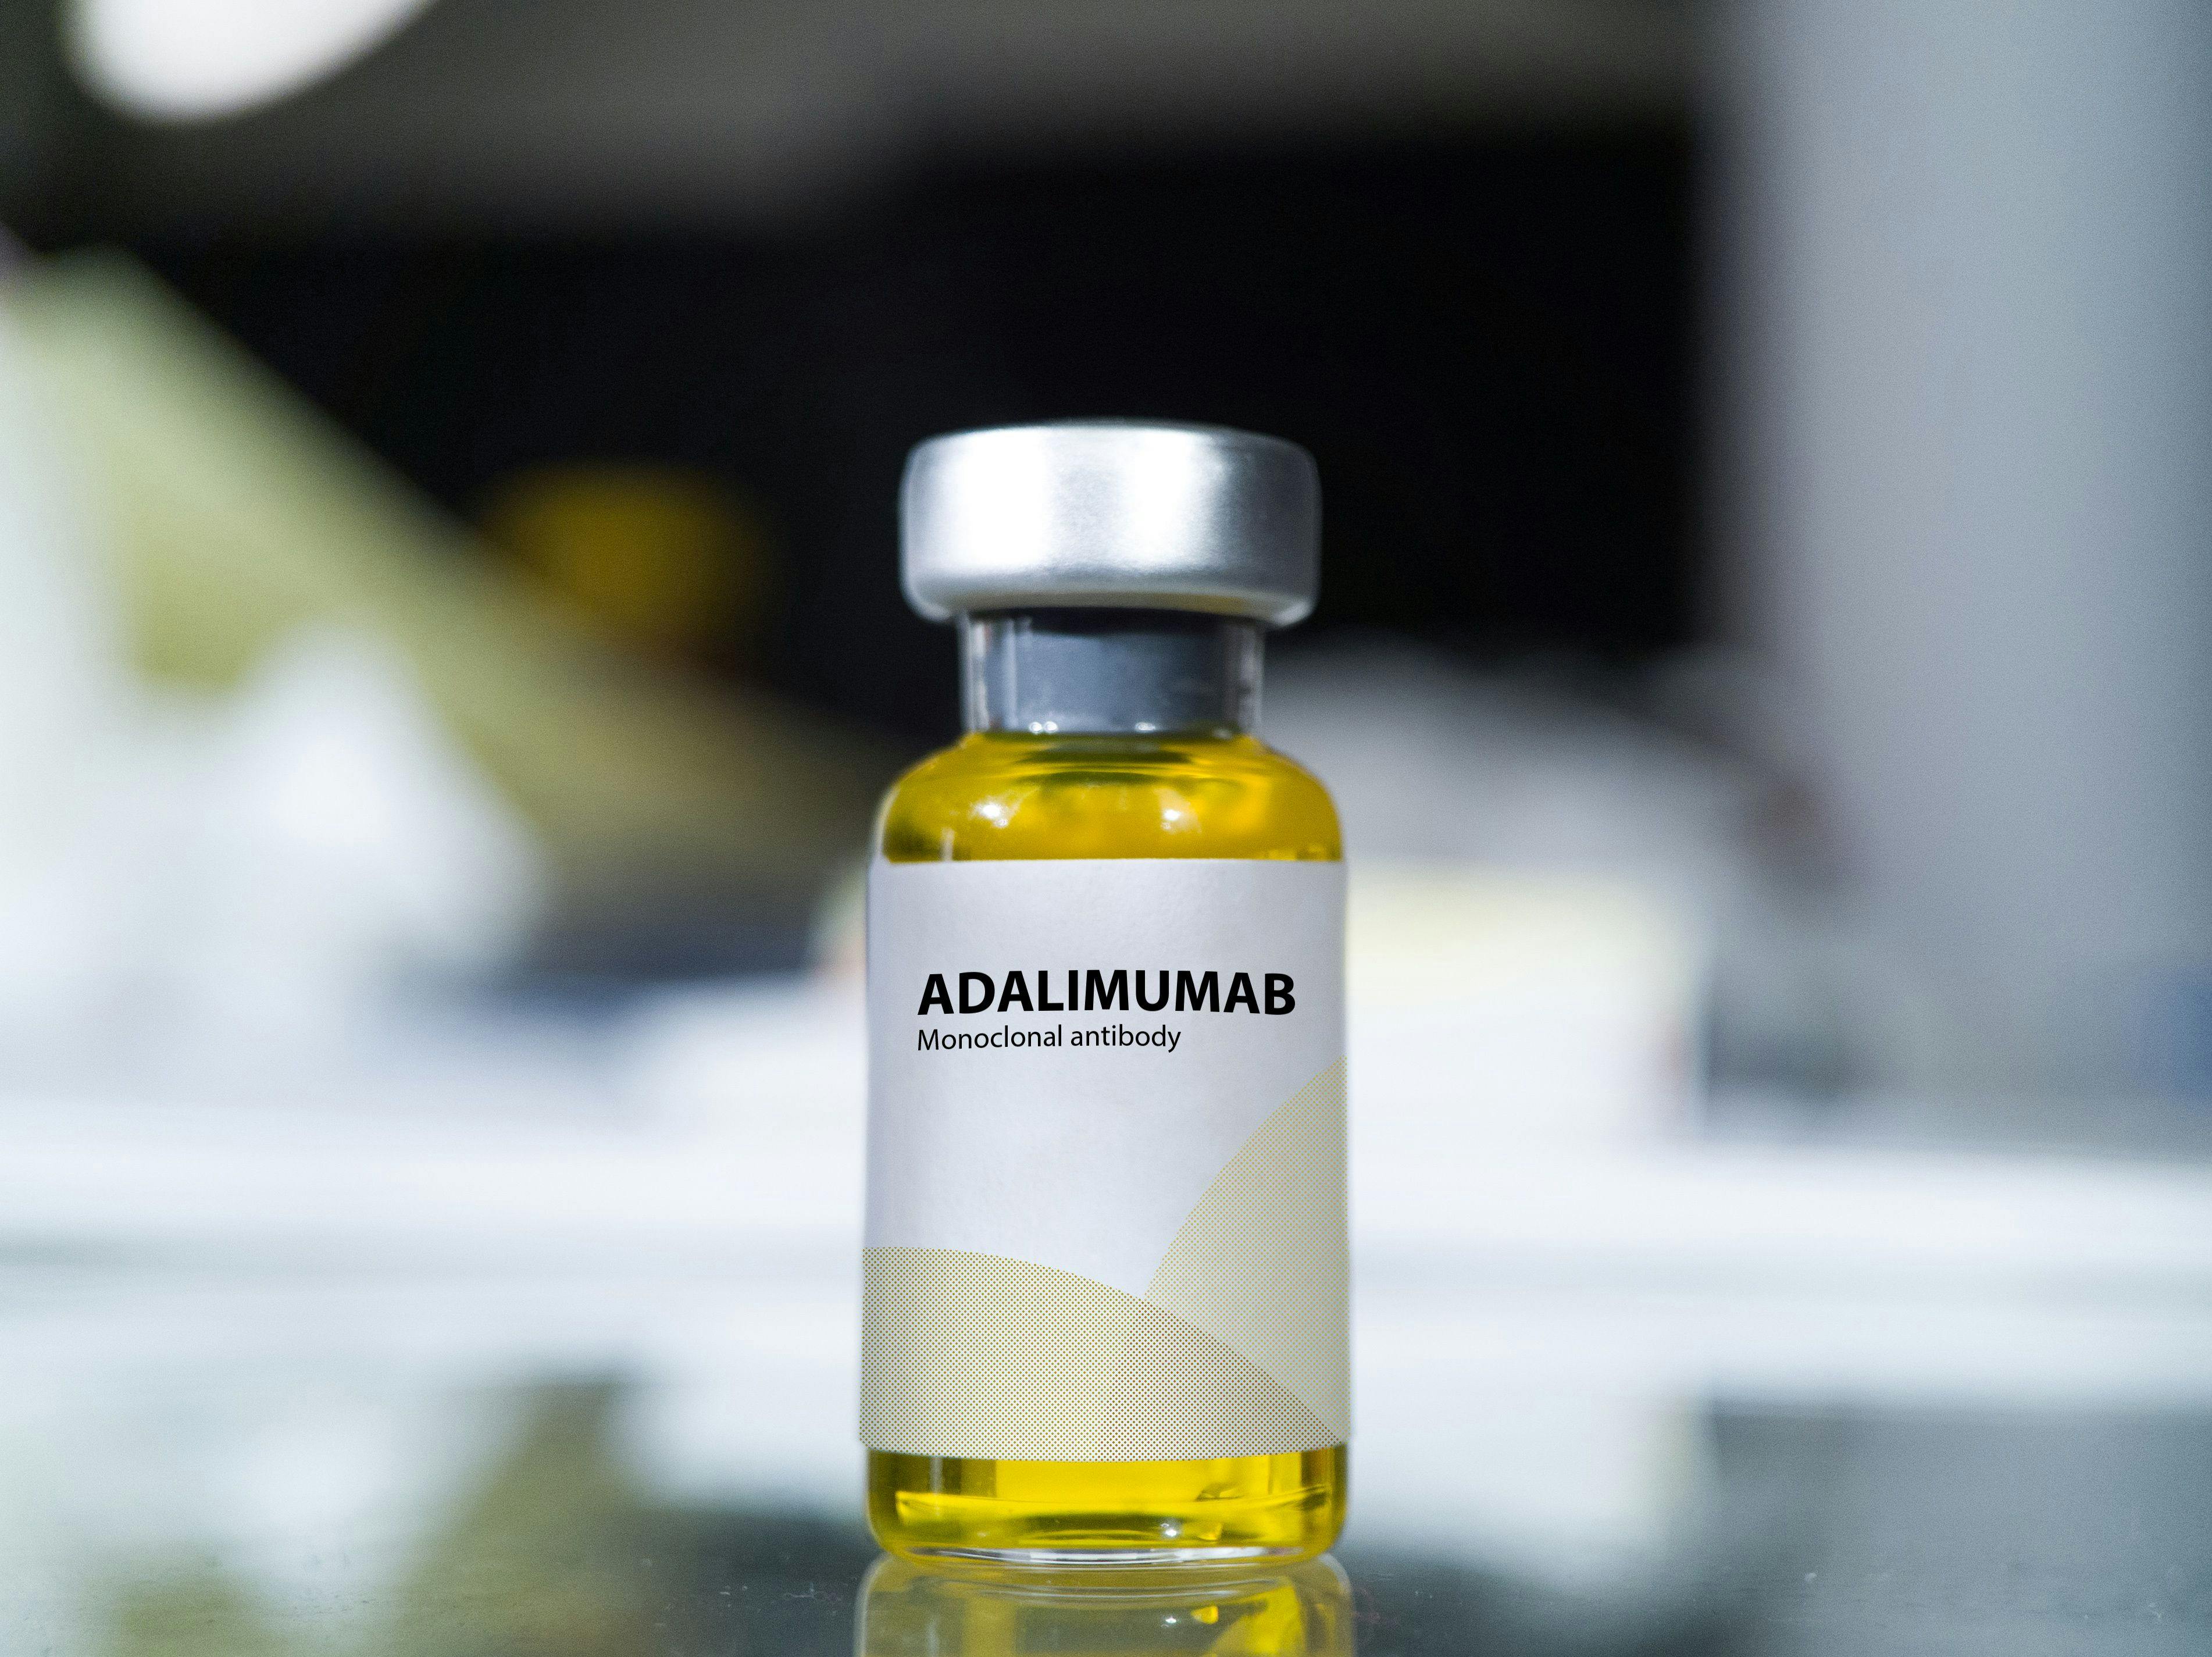 Adalimumab-atto Biosimilar Well Received After Launch